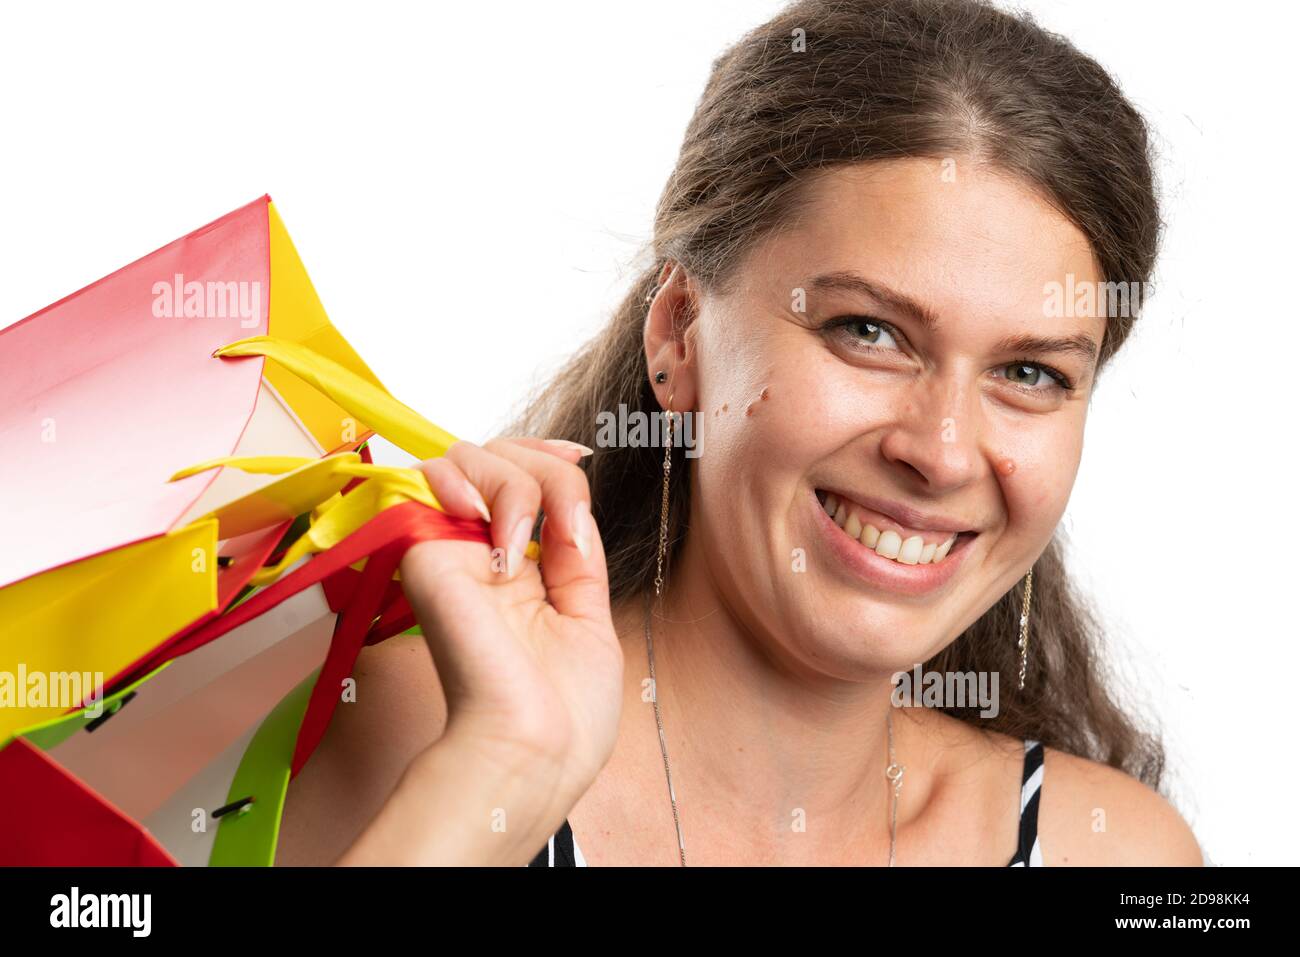 Close-up of happy cheerful woman making happy smiling friendly expression as carrying colourful shopping bags isolated on white studio background Stock Photo